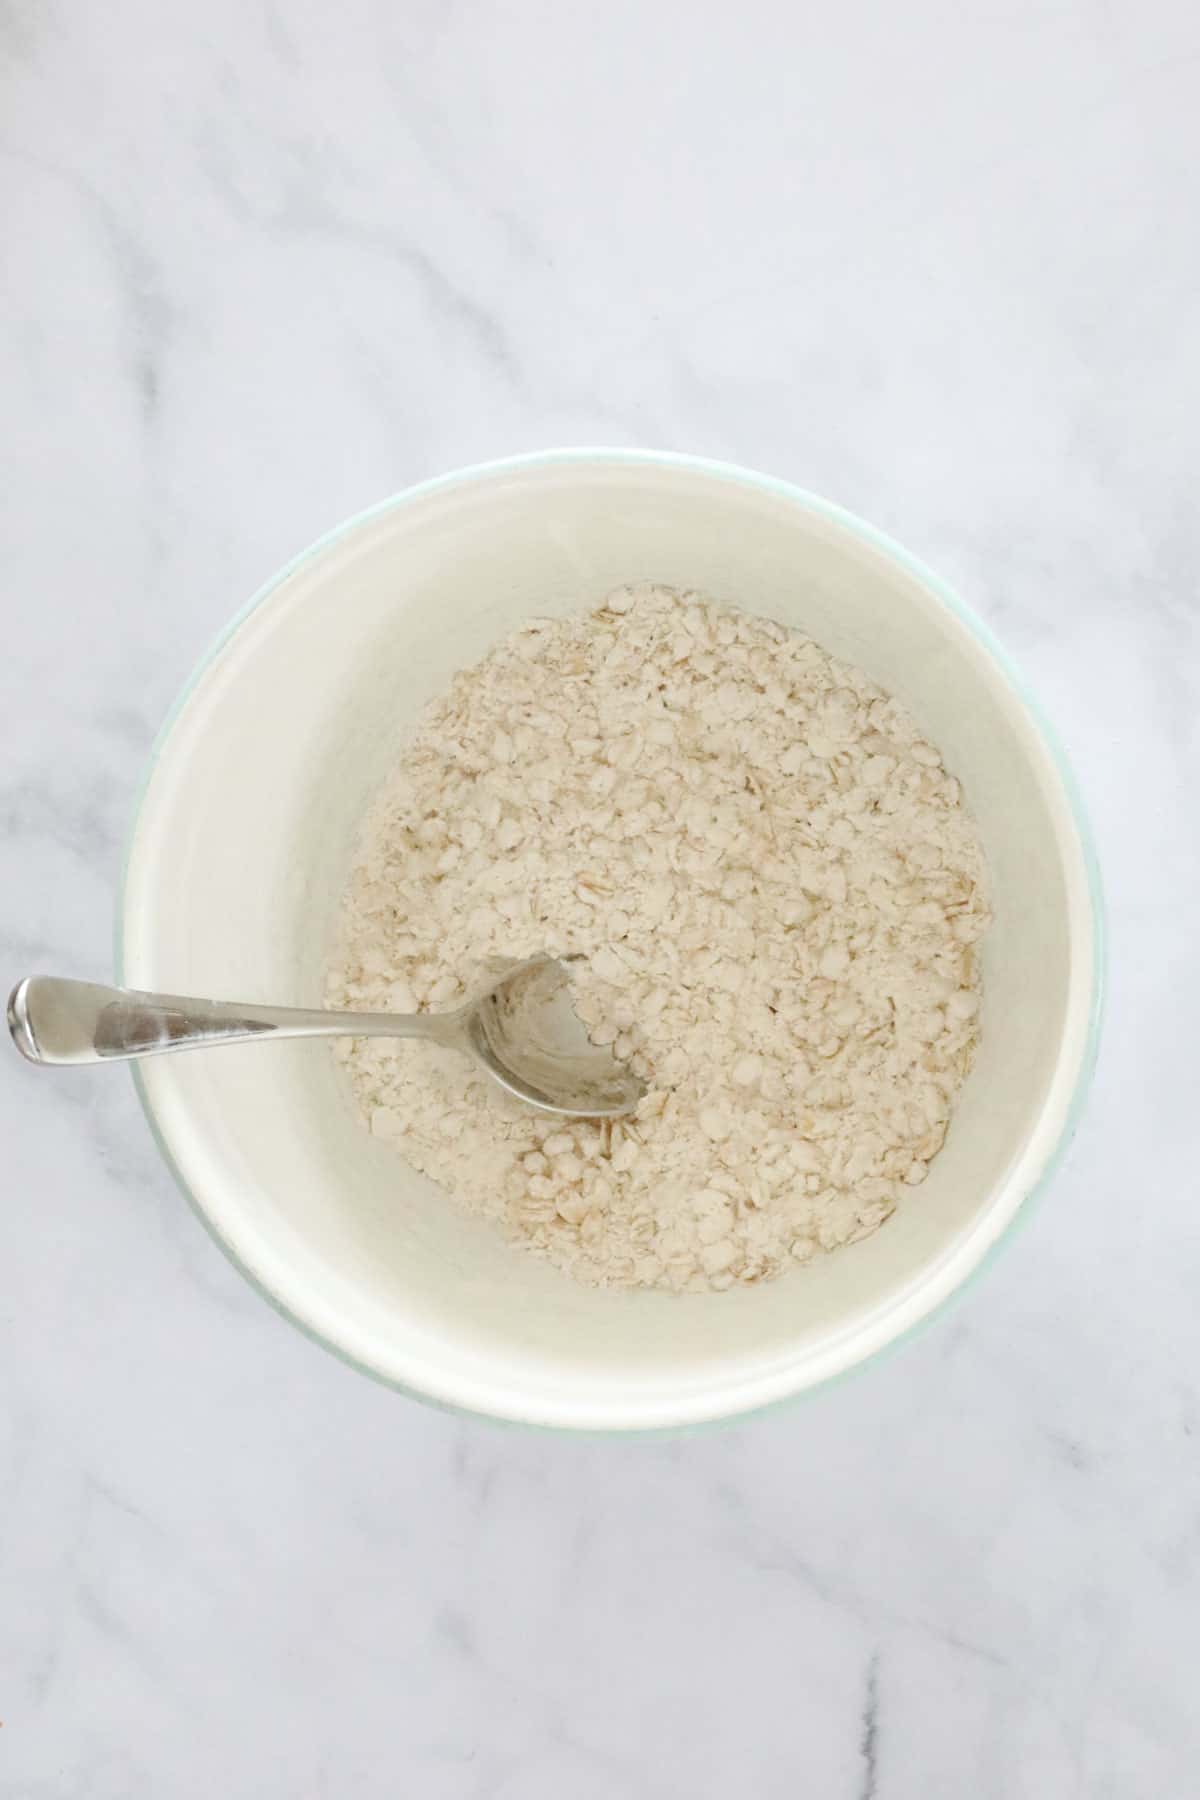 Flour, rolled oats, bicarb of soda and sugars in a white mixing bowl.